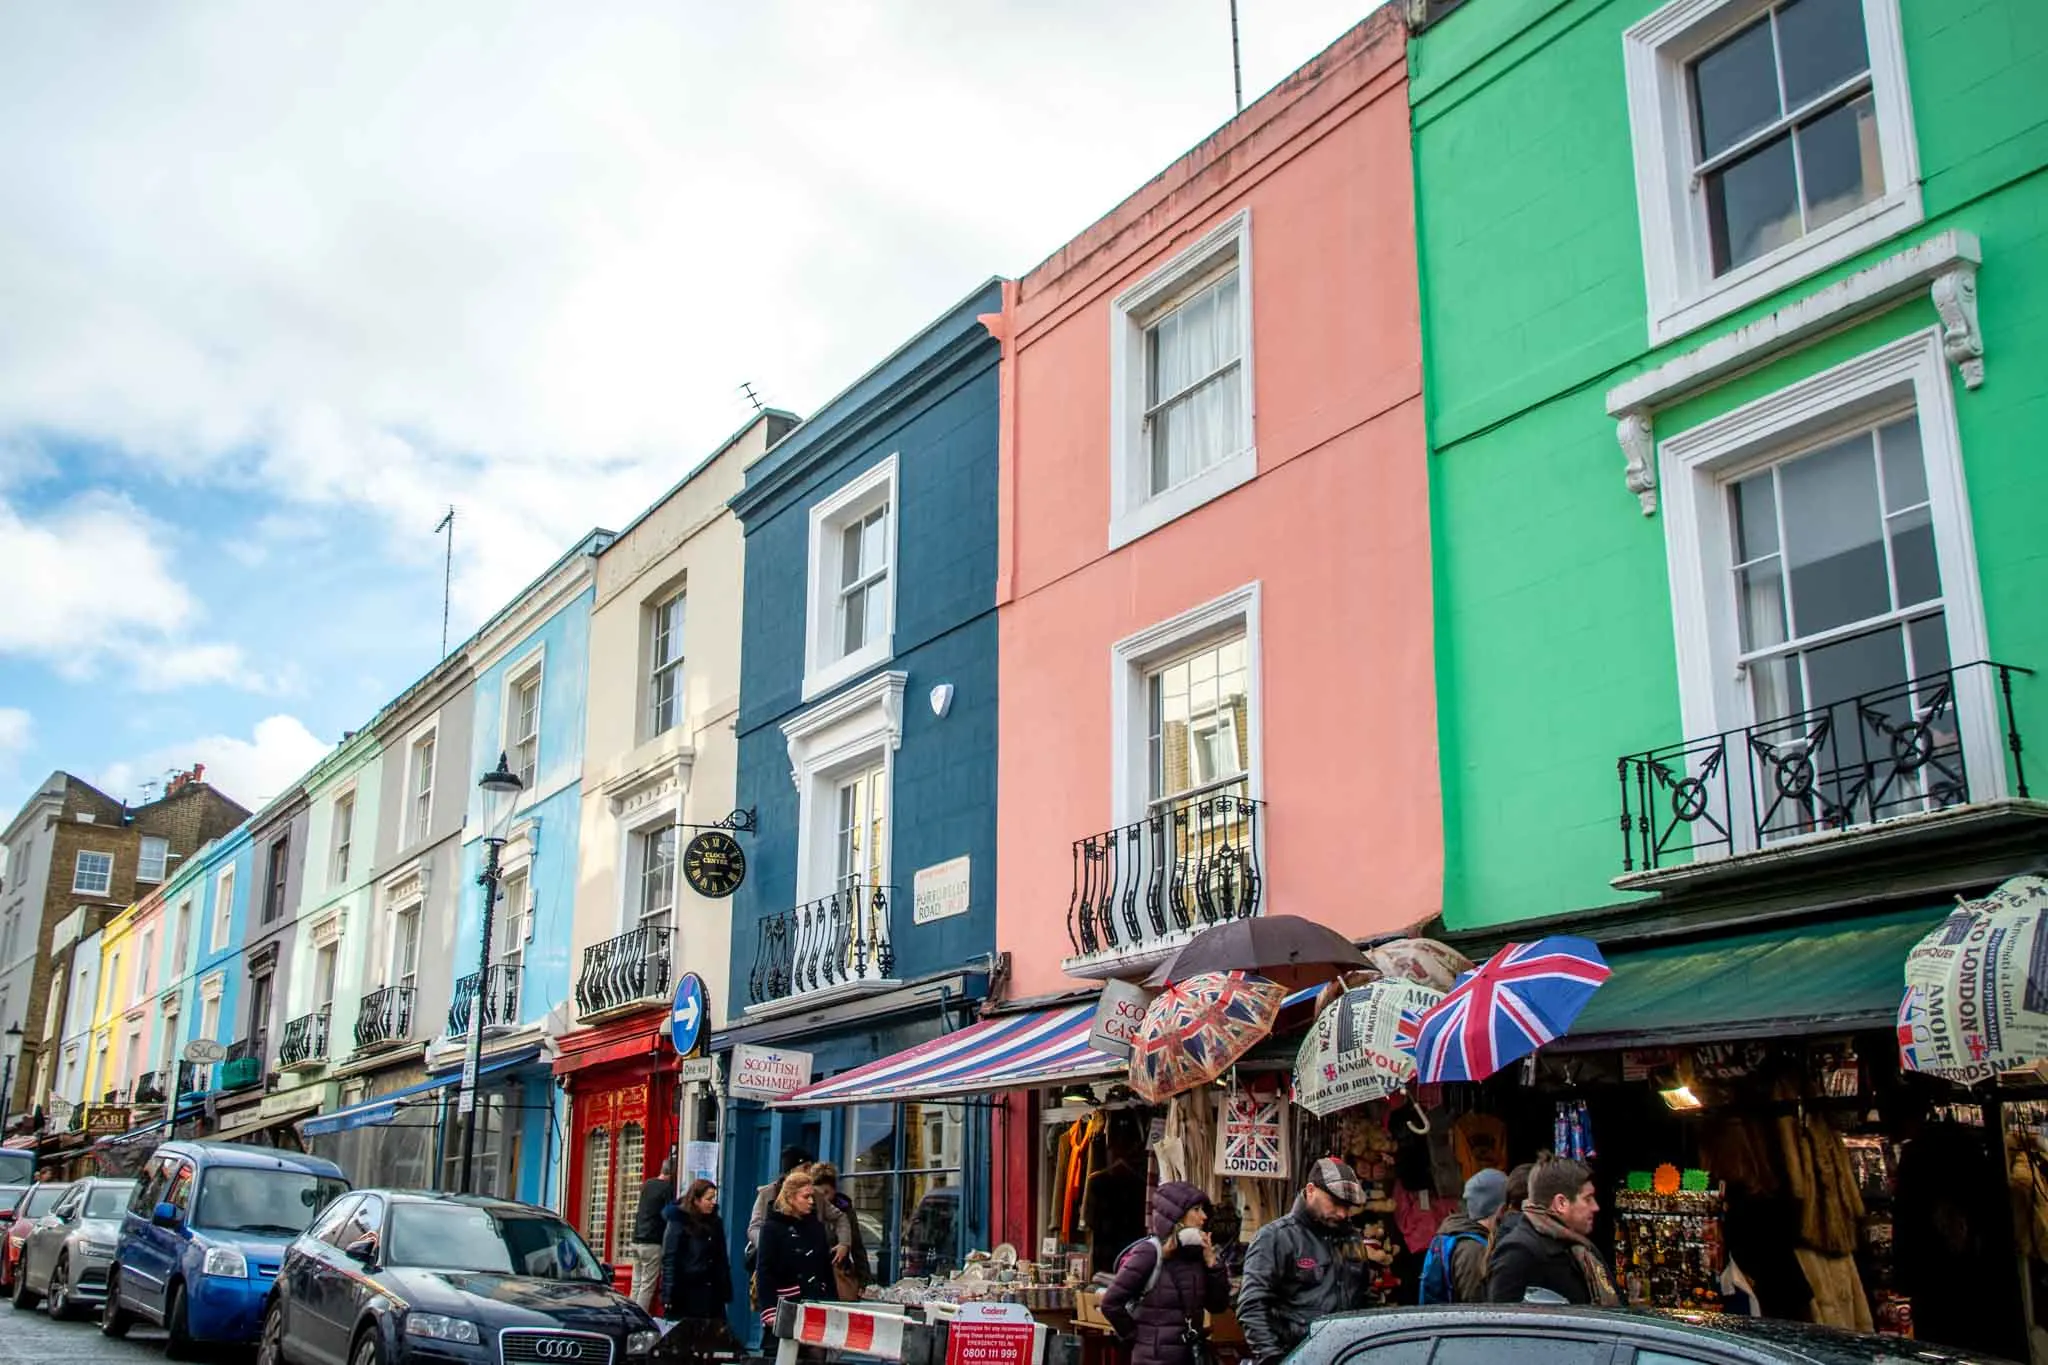 People walking by a row of colorful buildings on Portobello Road in Notting Hill